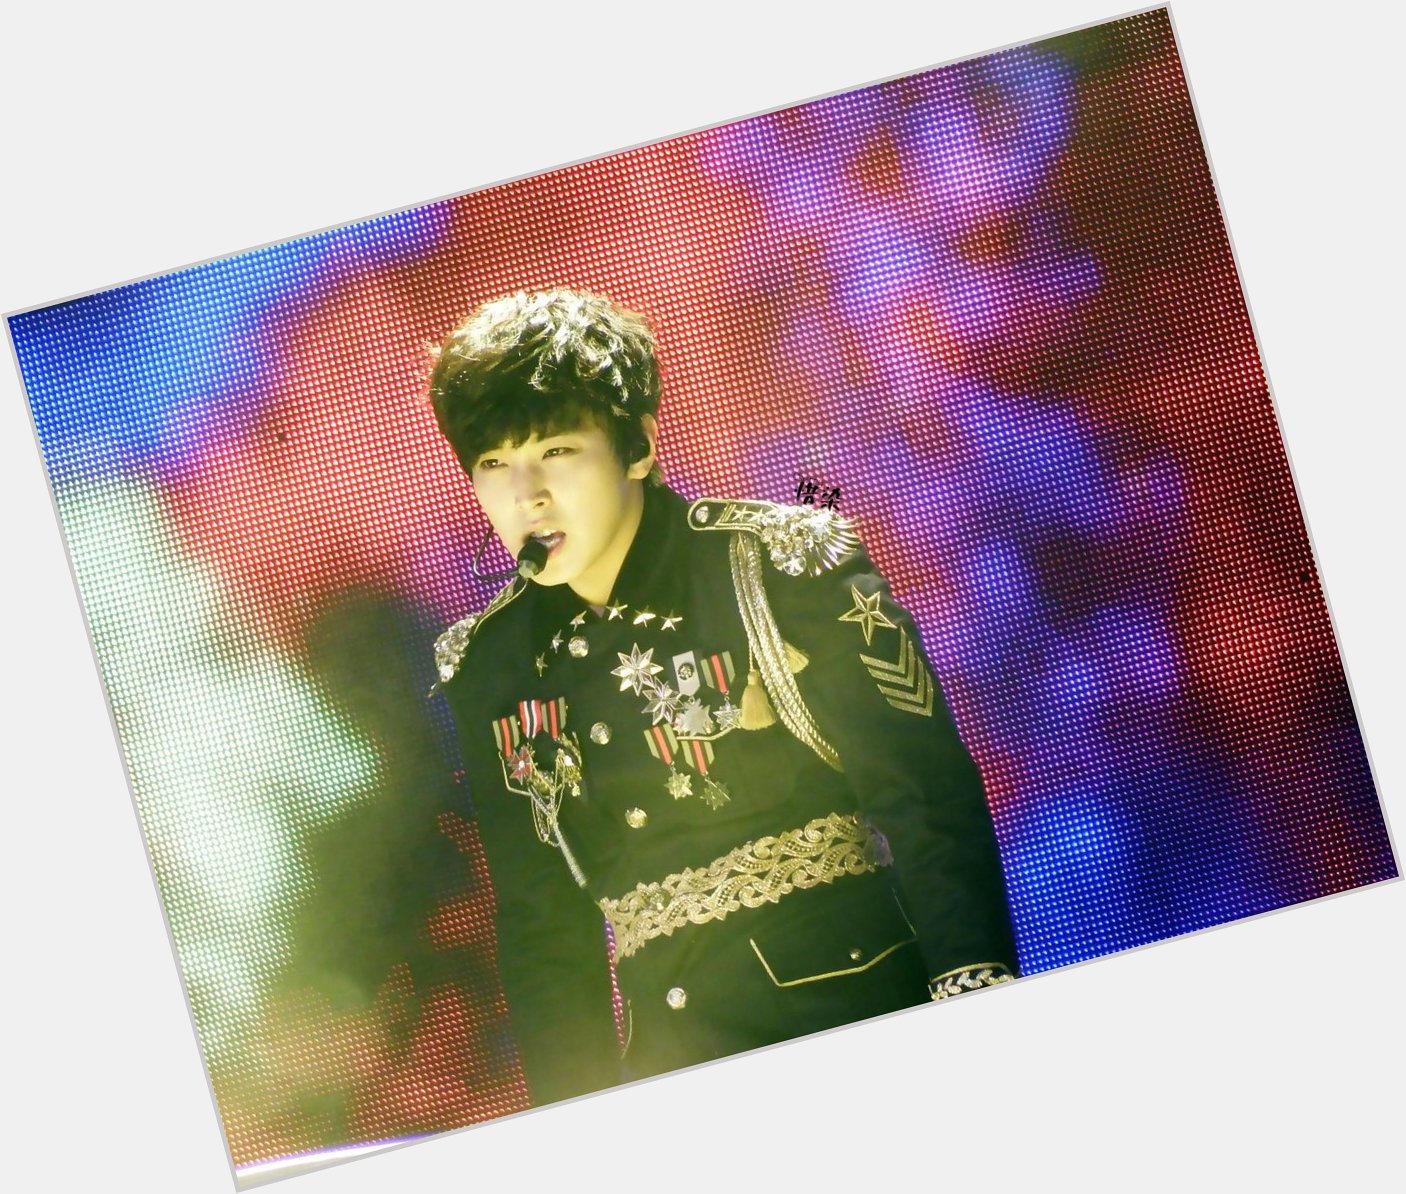  Happy Birthday Lee Sungmin Super Show6 BJ Plz DO NOT edit photos and remove logo, no commerical use 